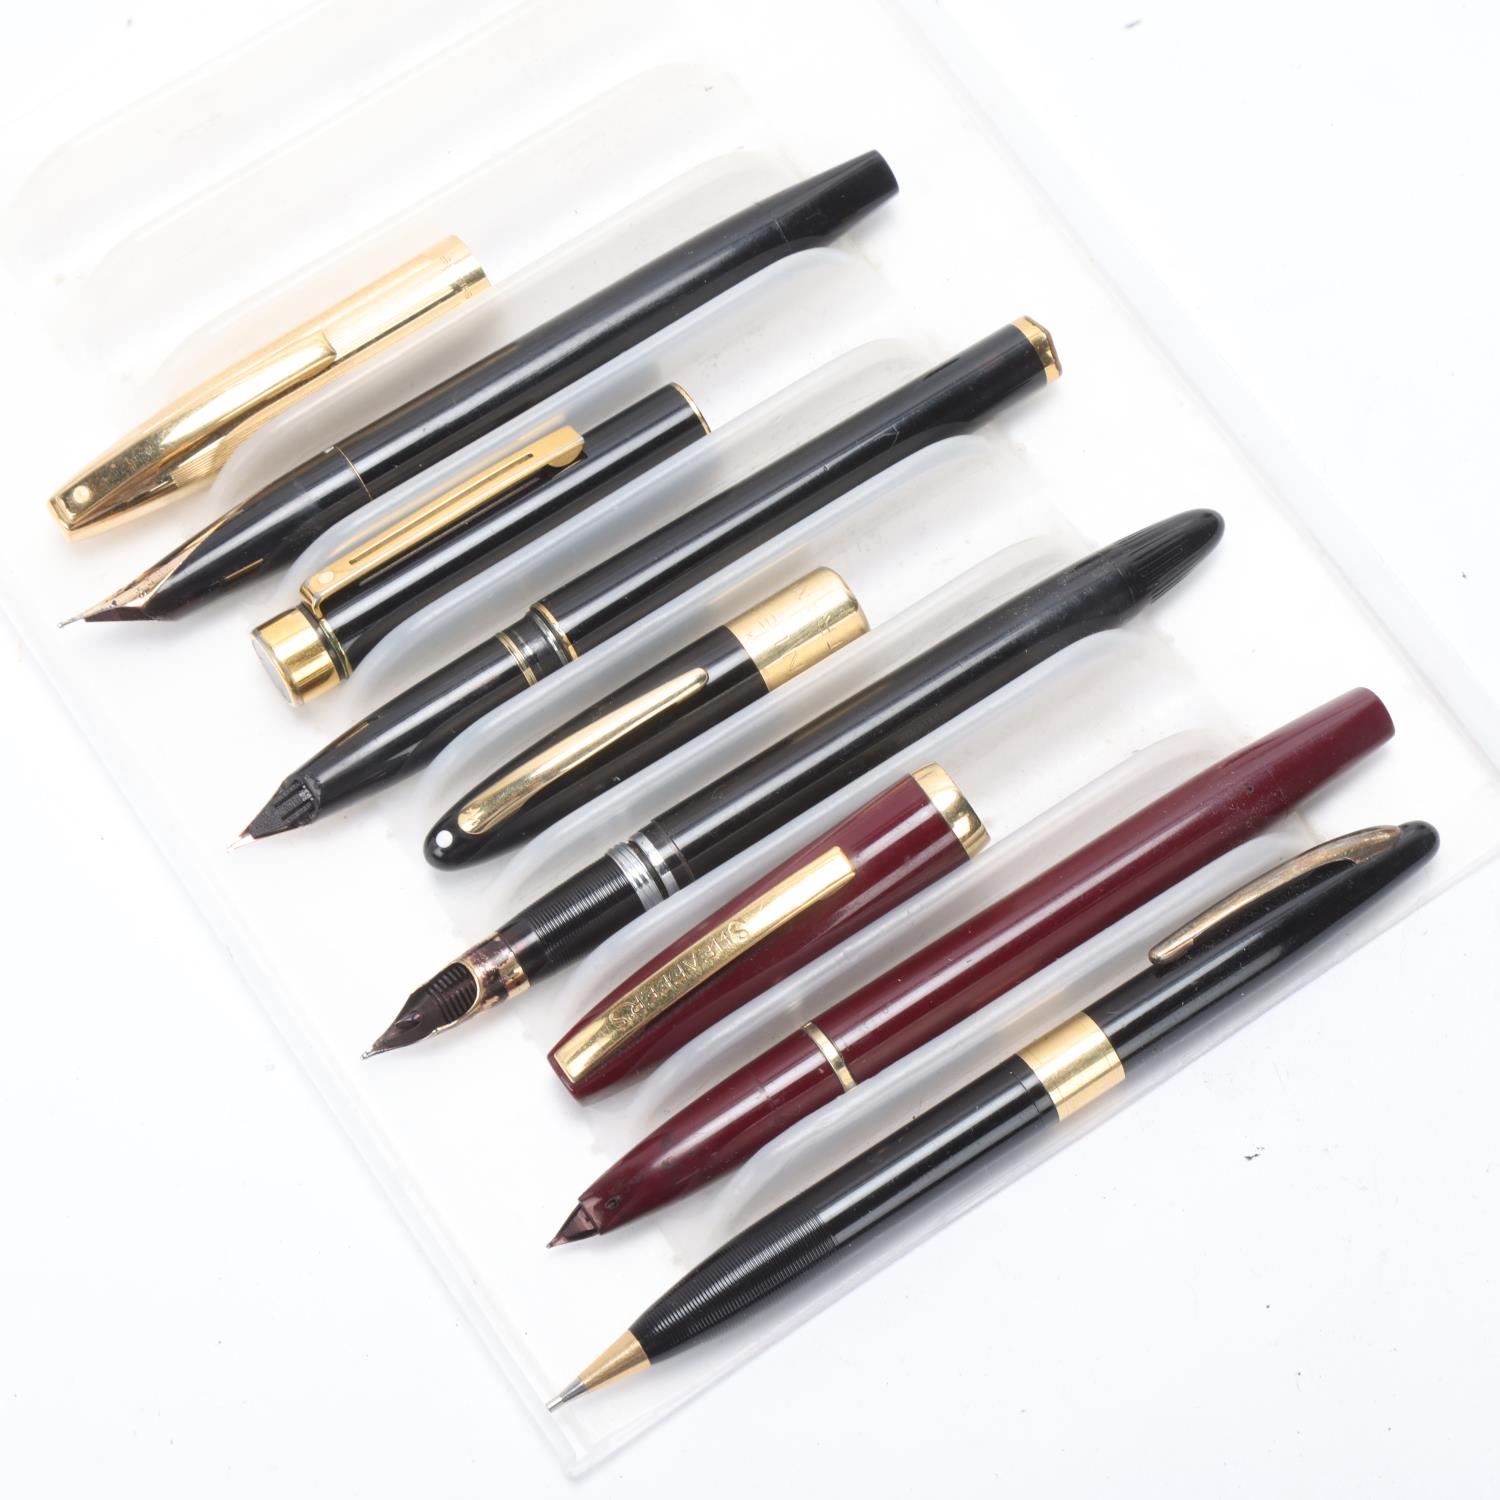 4 vintage Sheaffer fountain pens and a Schaffer's 500 pencil, all pens with 14k nib, 1 pen with - Image 4 of 4